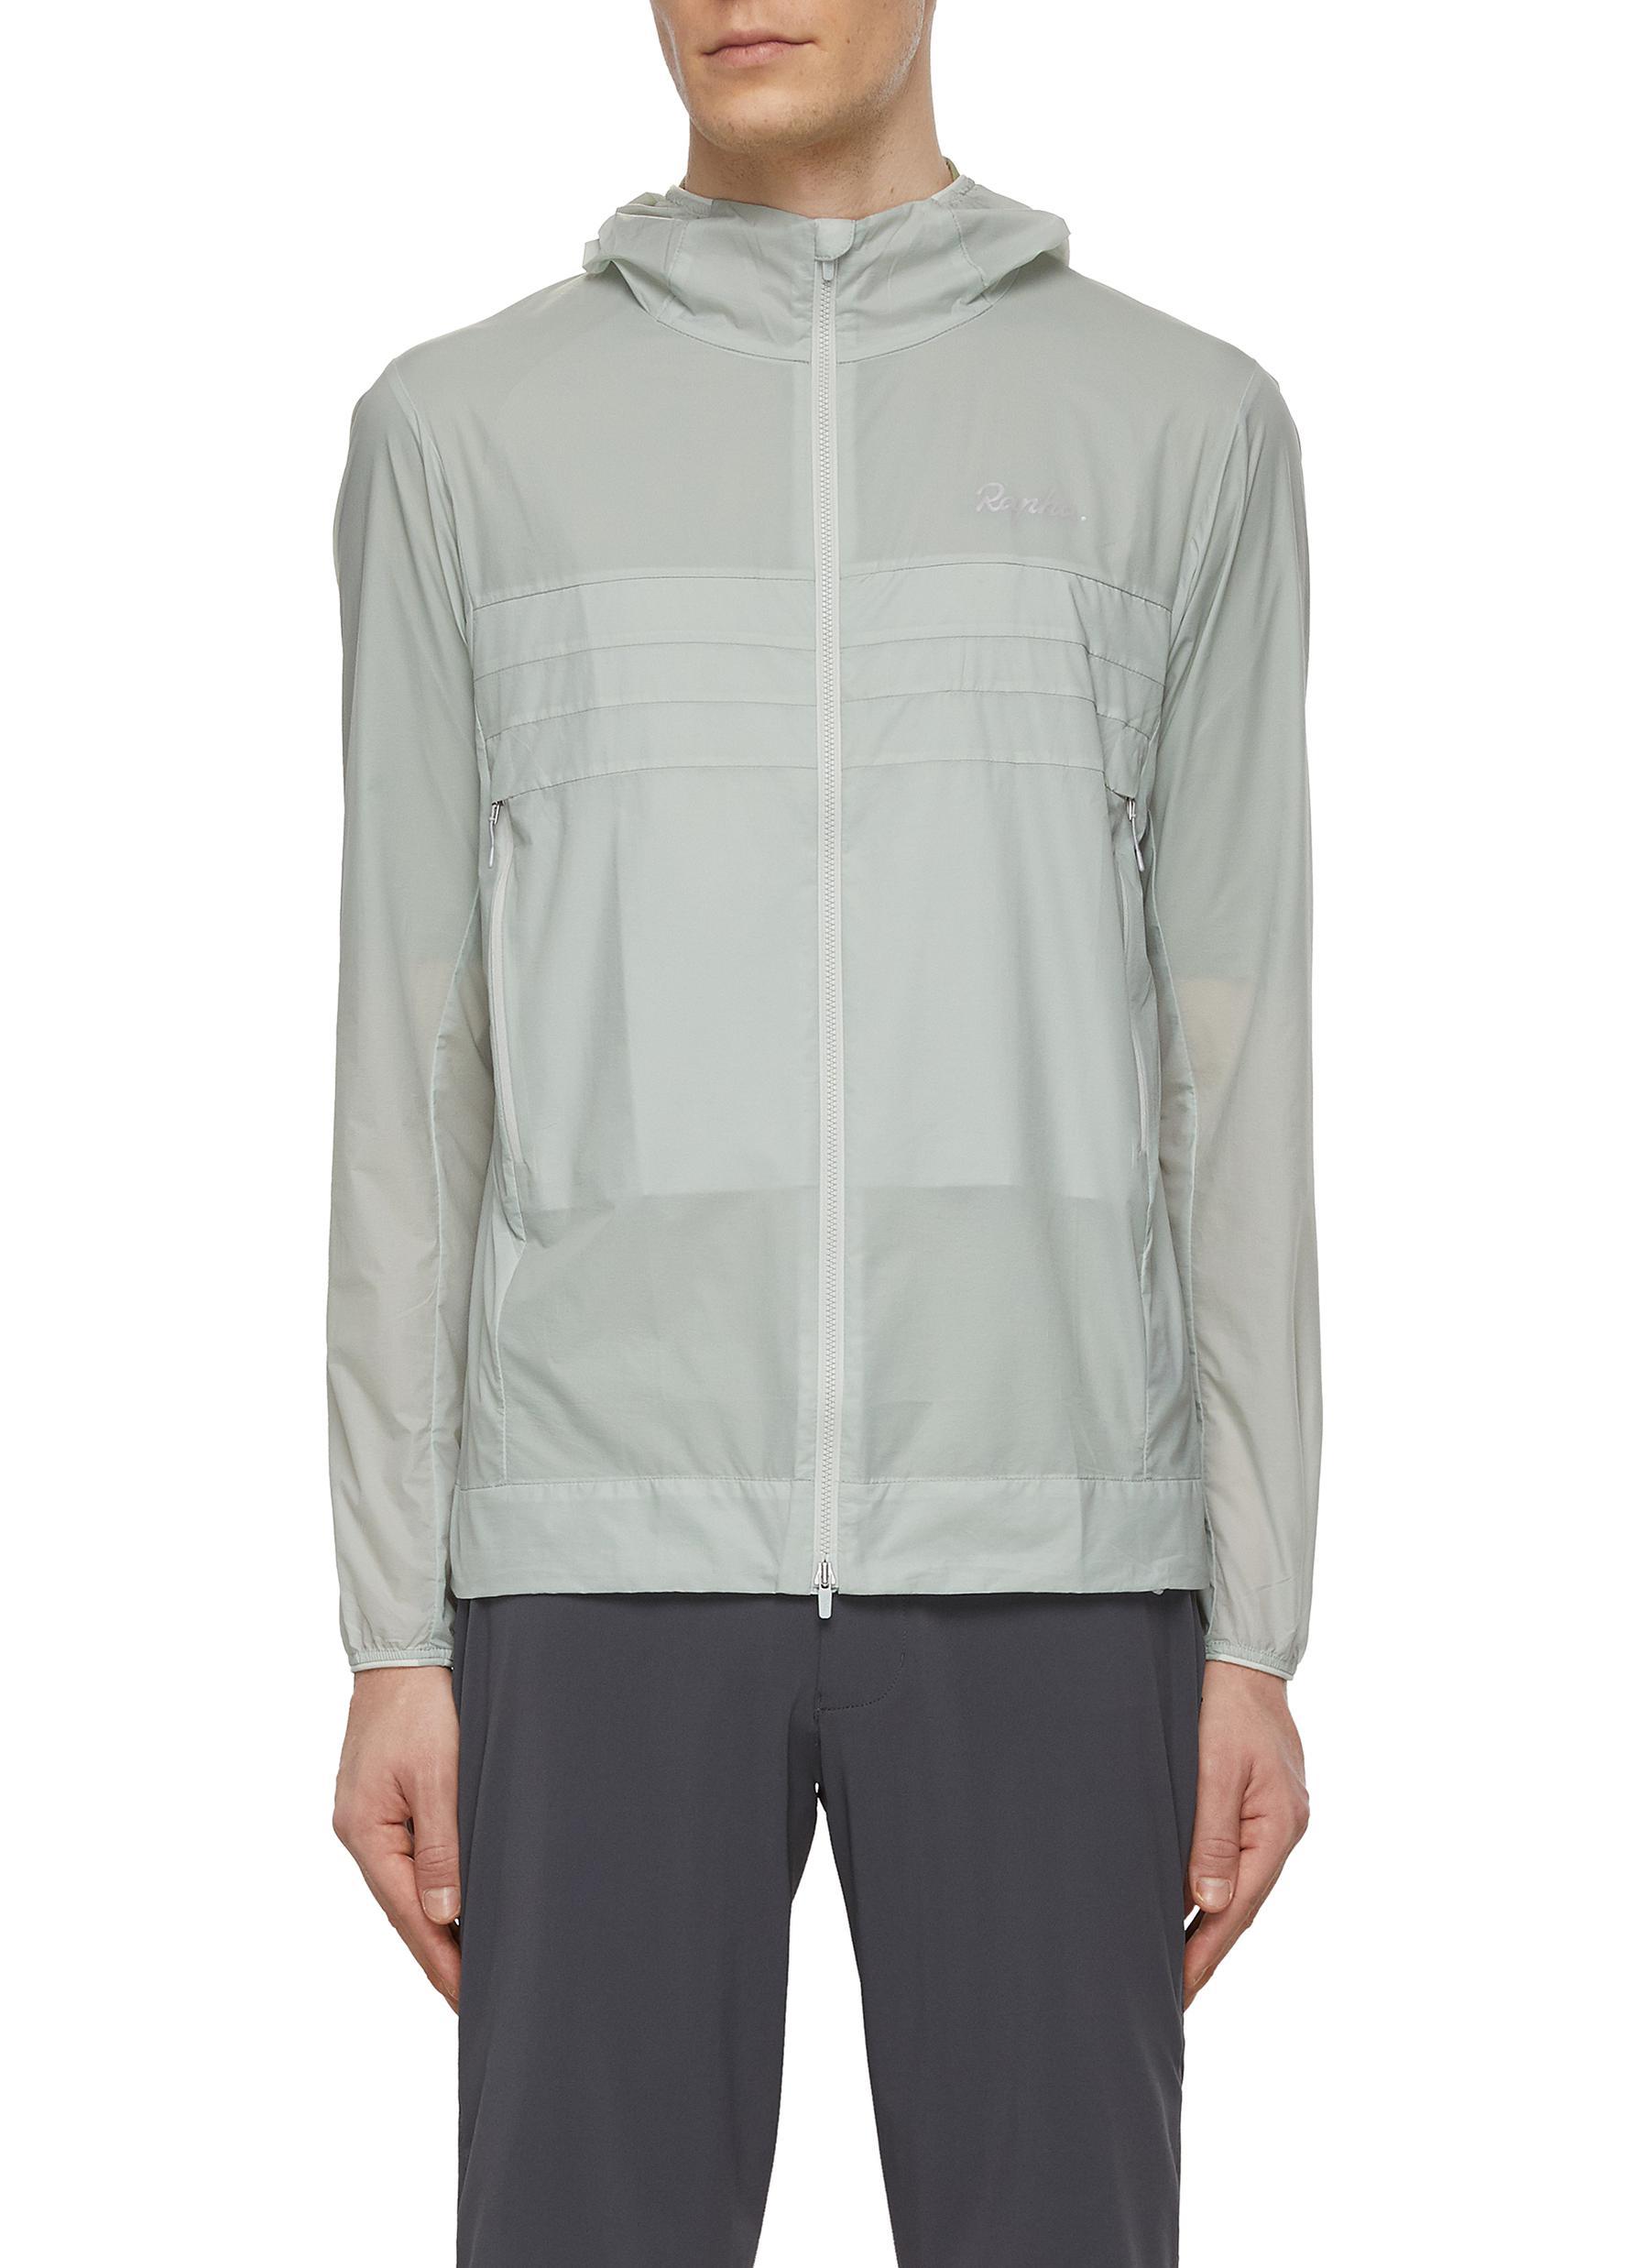 Rapha Explore Hooded Lightweight Jacket in Gray for Men Lyst